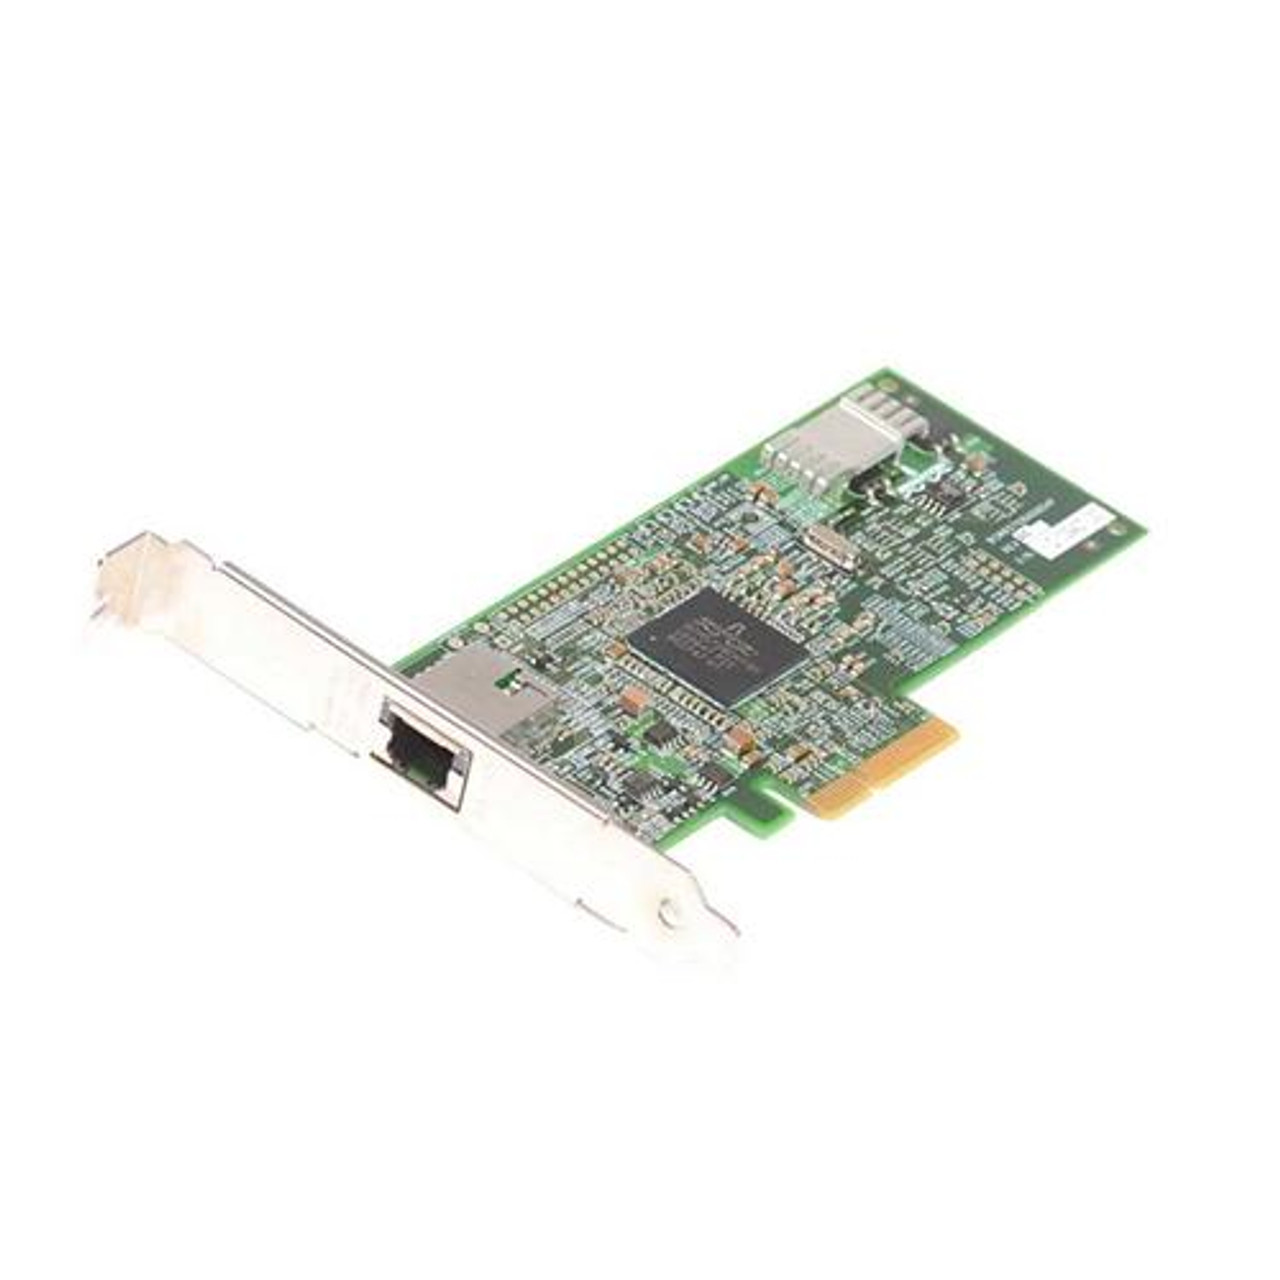 39Y6070-02 IBM NetXtreme II 1000 Express Single-Port 1Gbps 10Base-T/100Base-TX/1000Base-T Gigabit Ethernet PCI Express x4 Network Adapter by Broadcom for